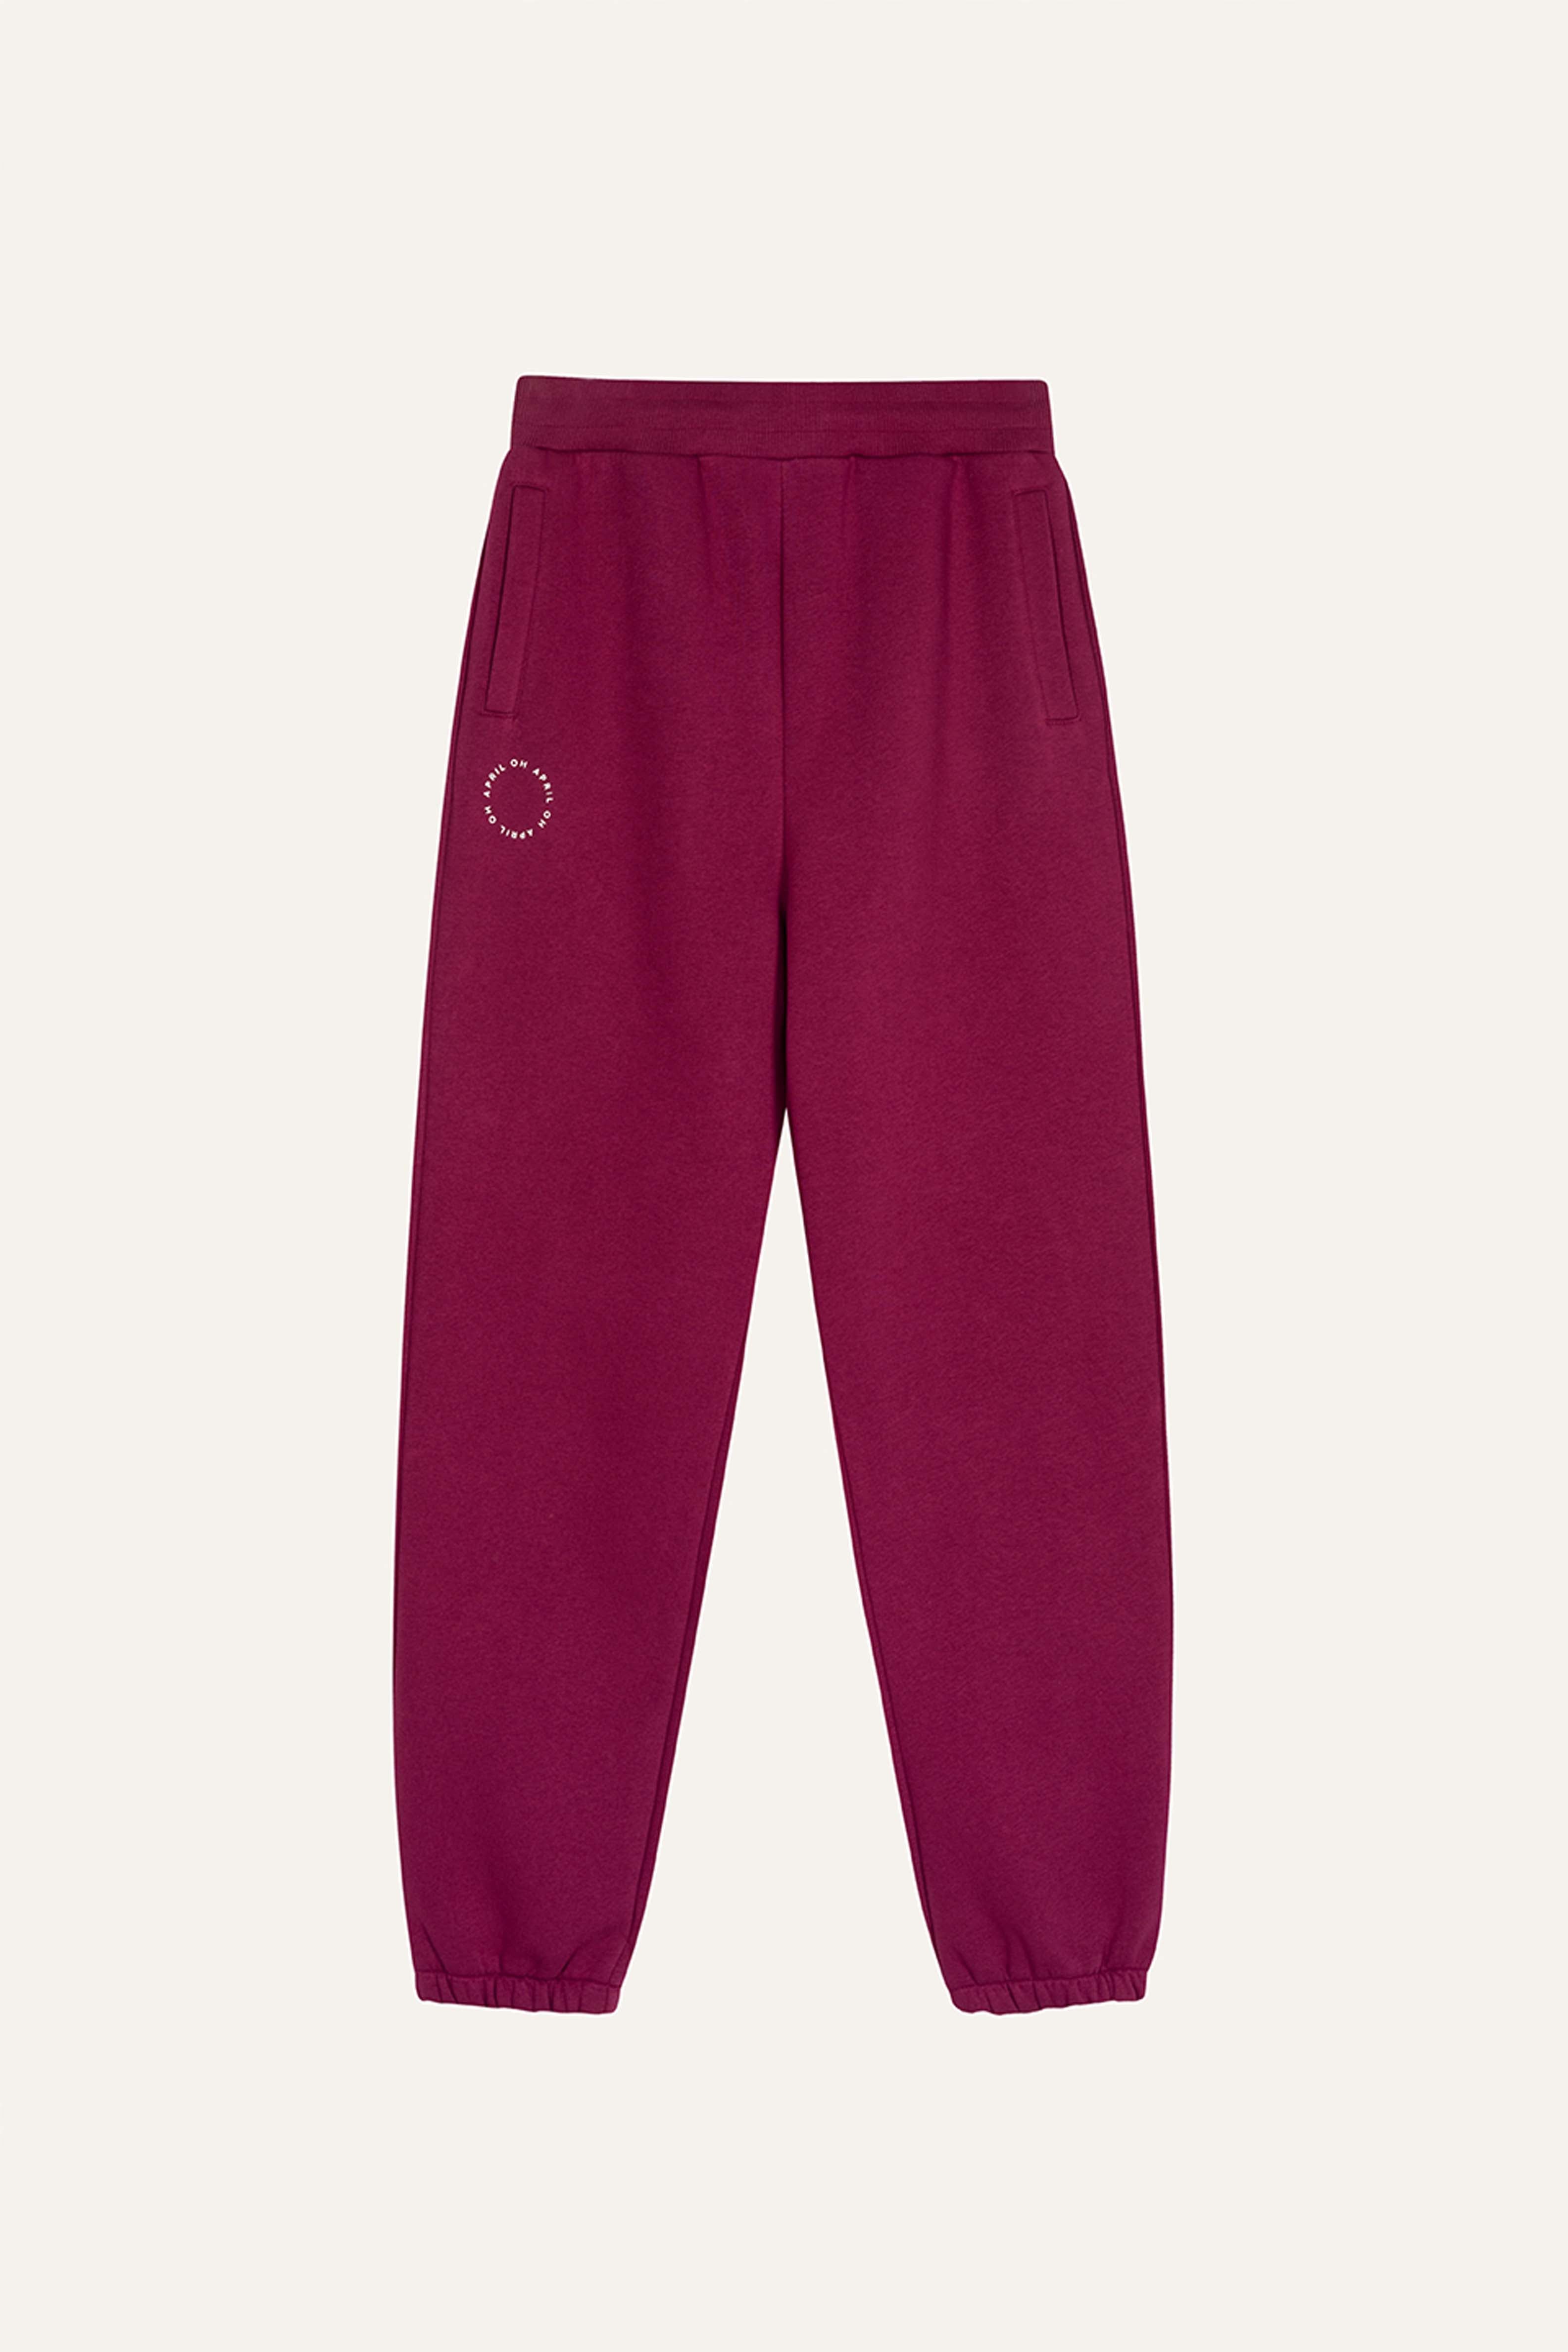 Riley Jogger Berry